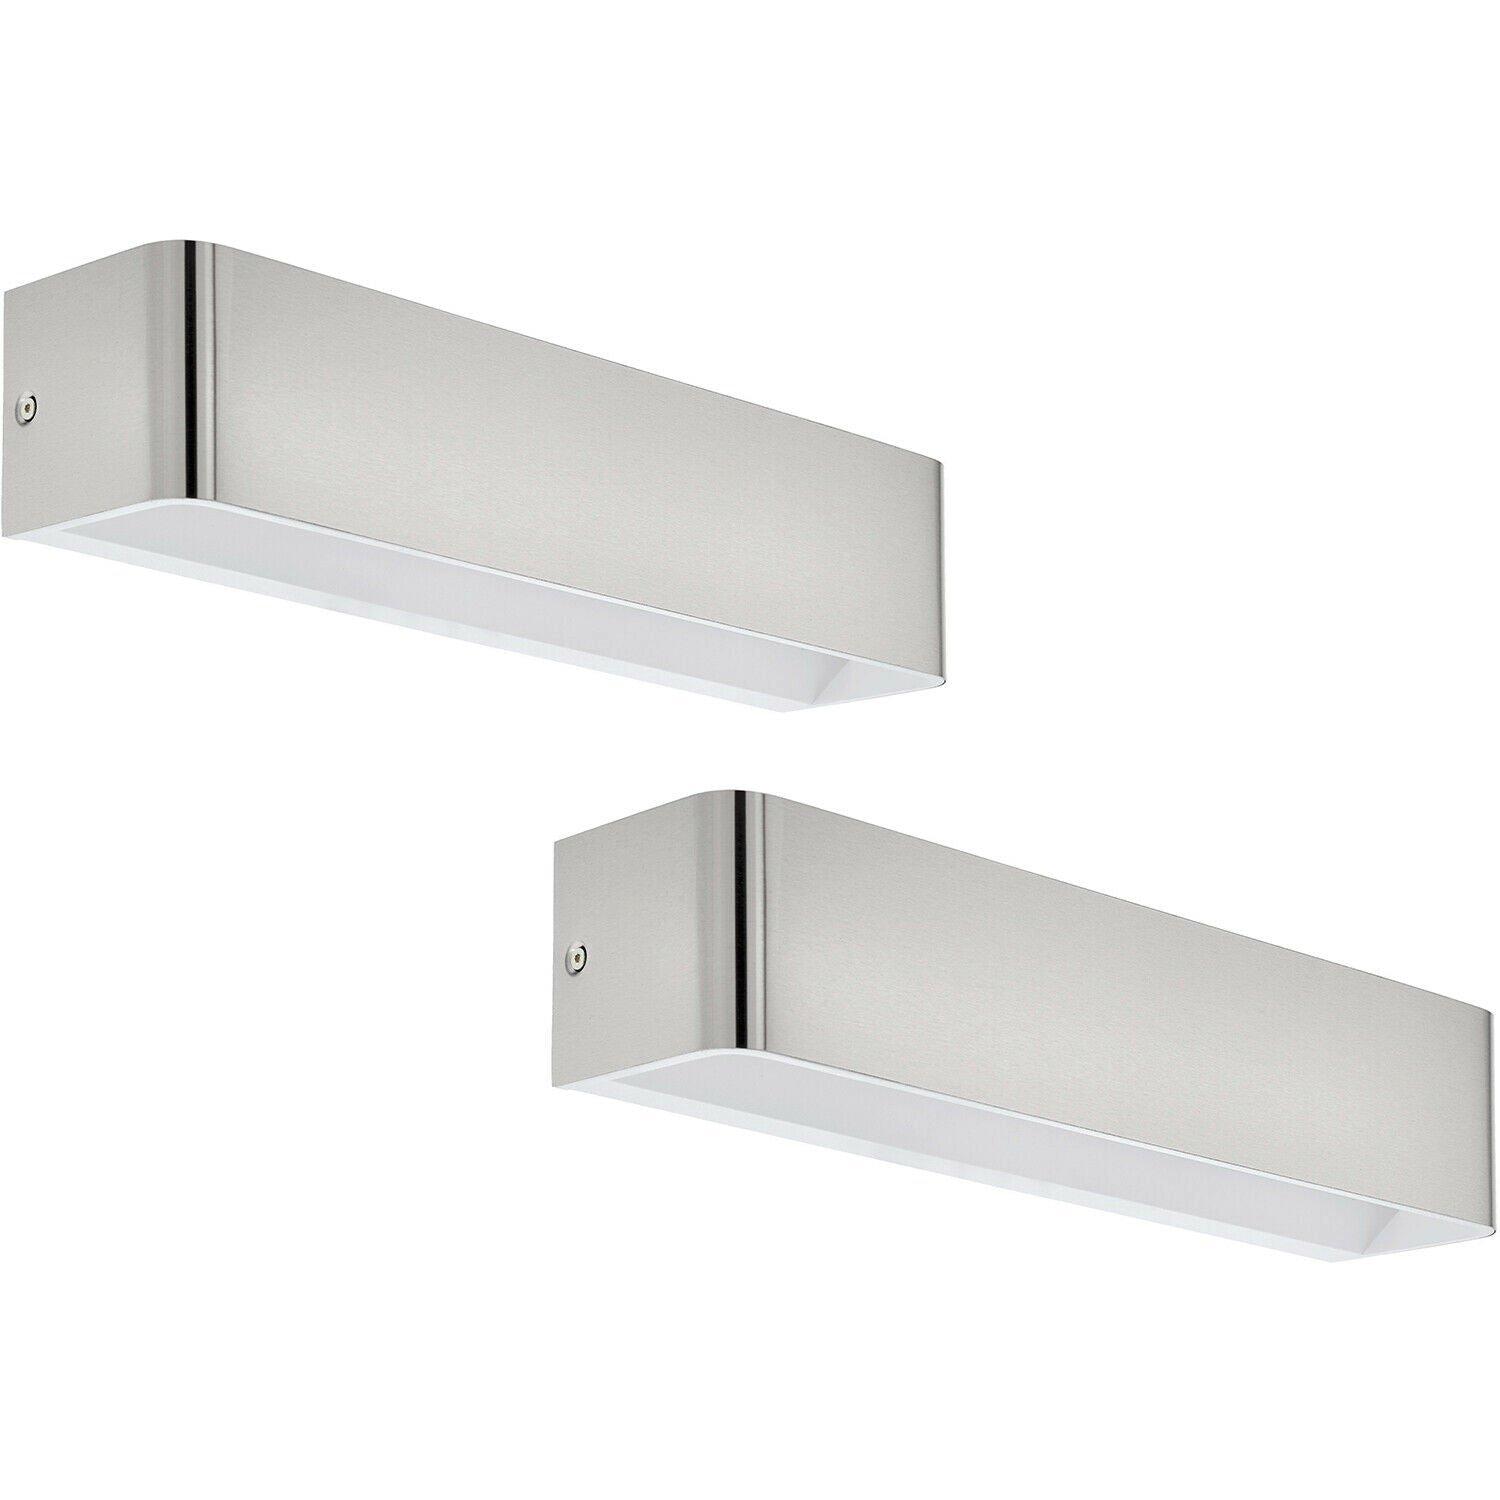 2 PACK Wall Light Satin Nickel Front Cover Oblong Box Structure LED 12W Inc